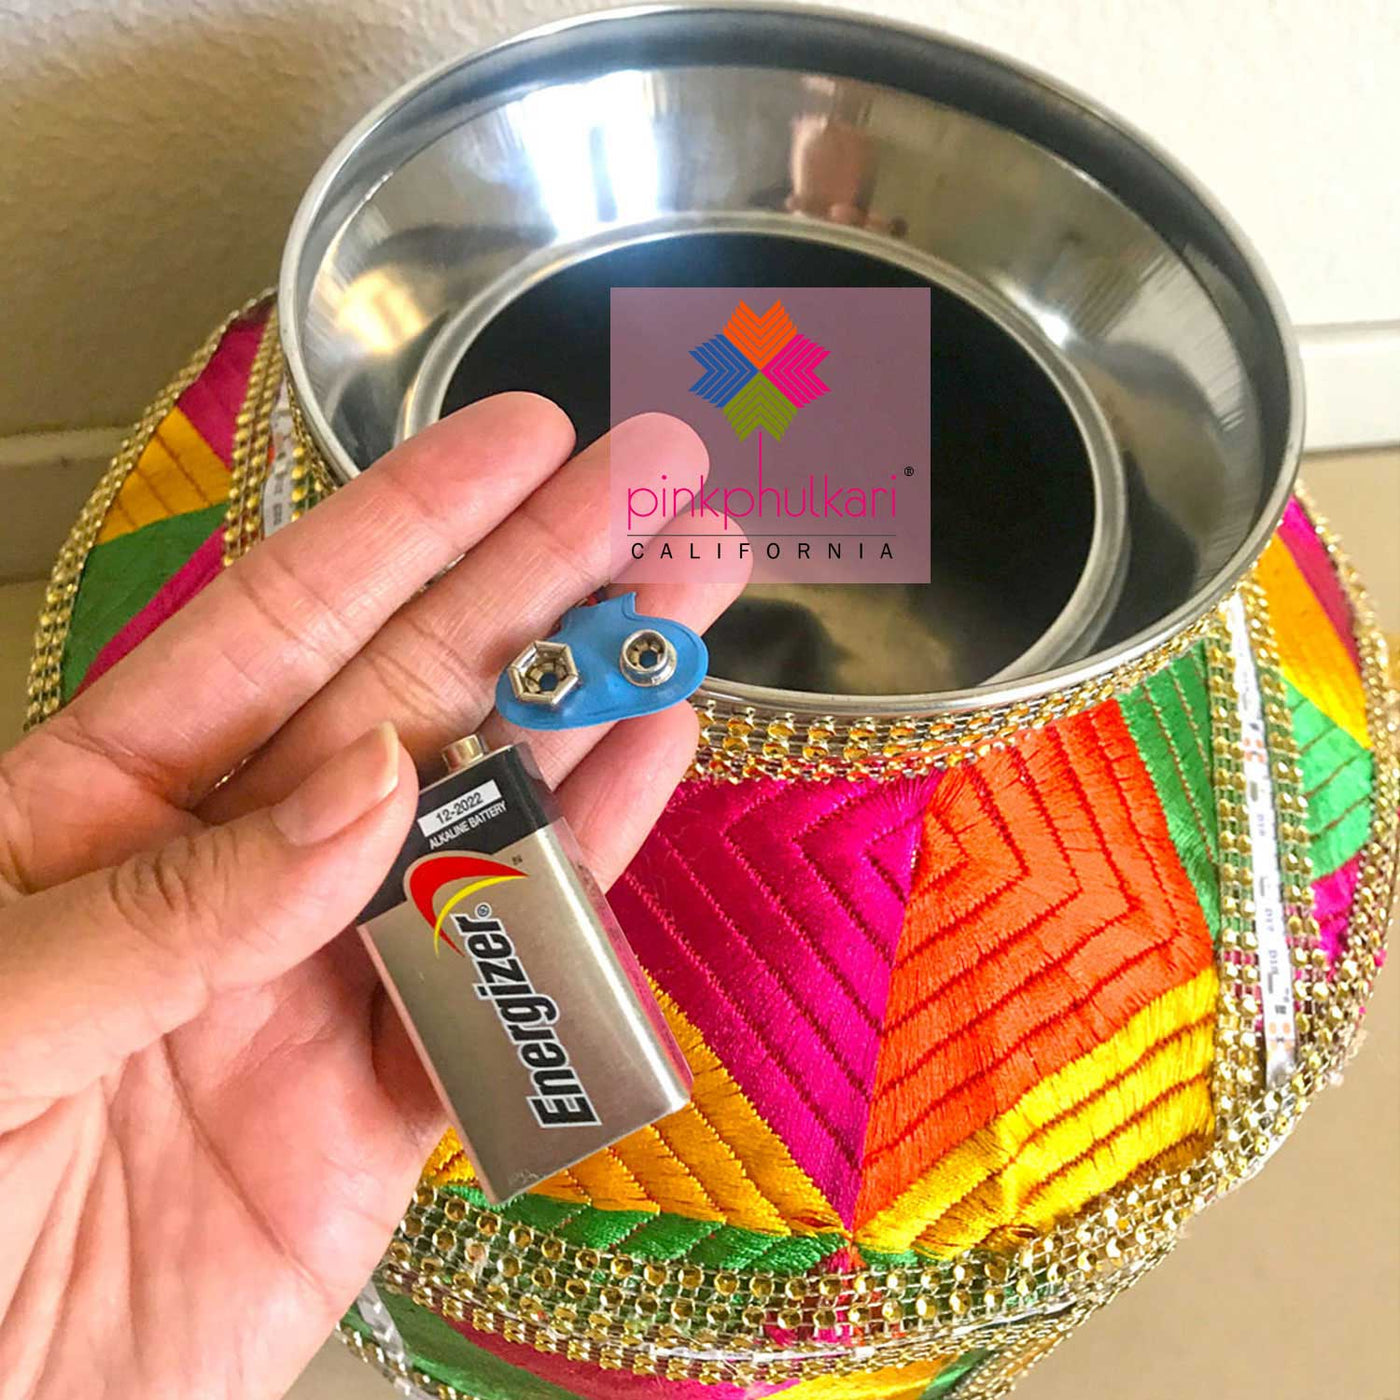 Stainless Steel Indian Wedding Jaago Pot Large Double with LED Lights at PinkPhulkari California